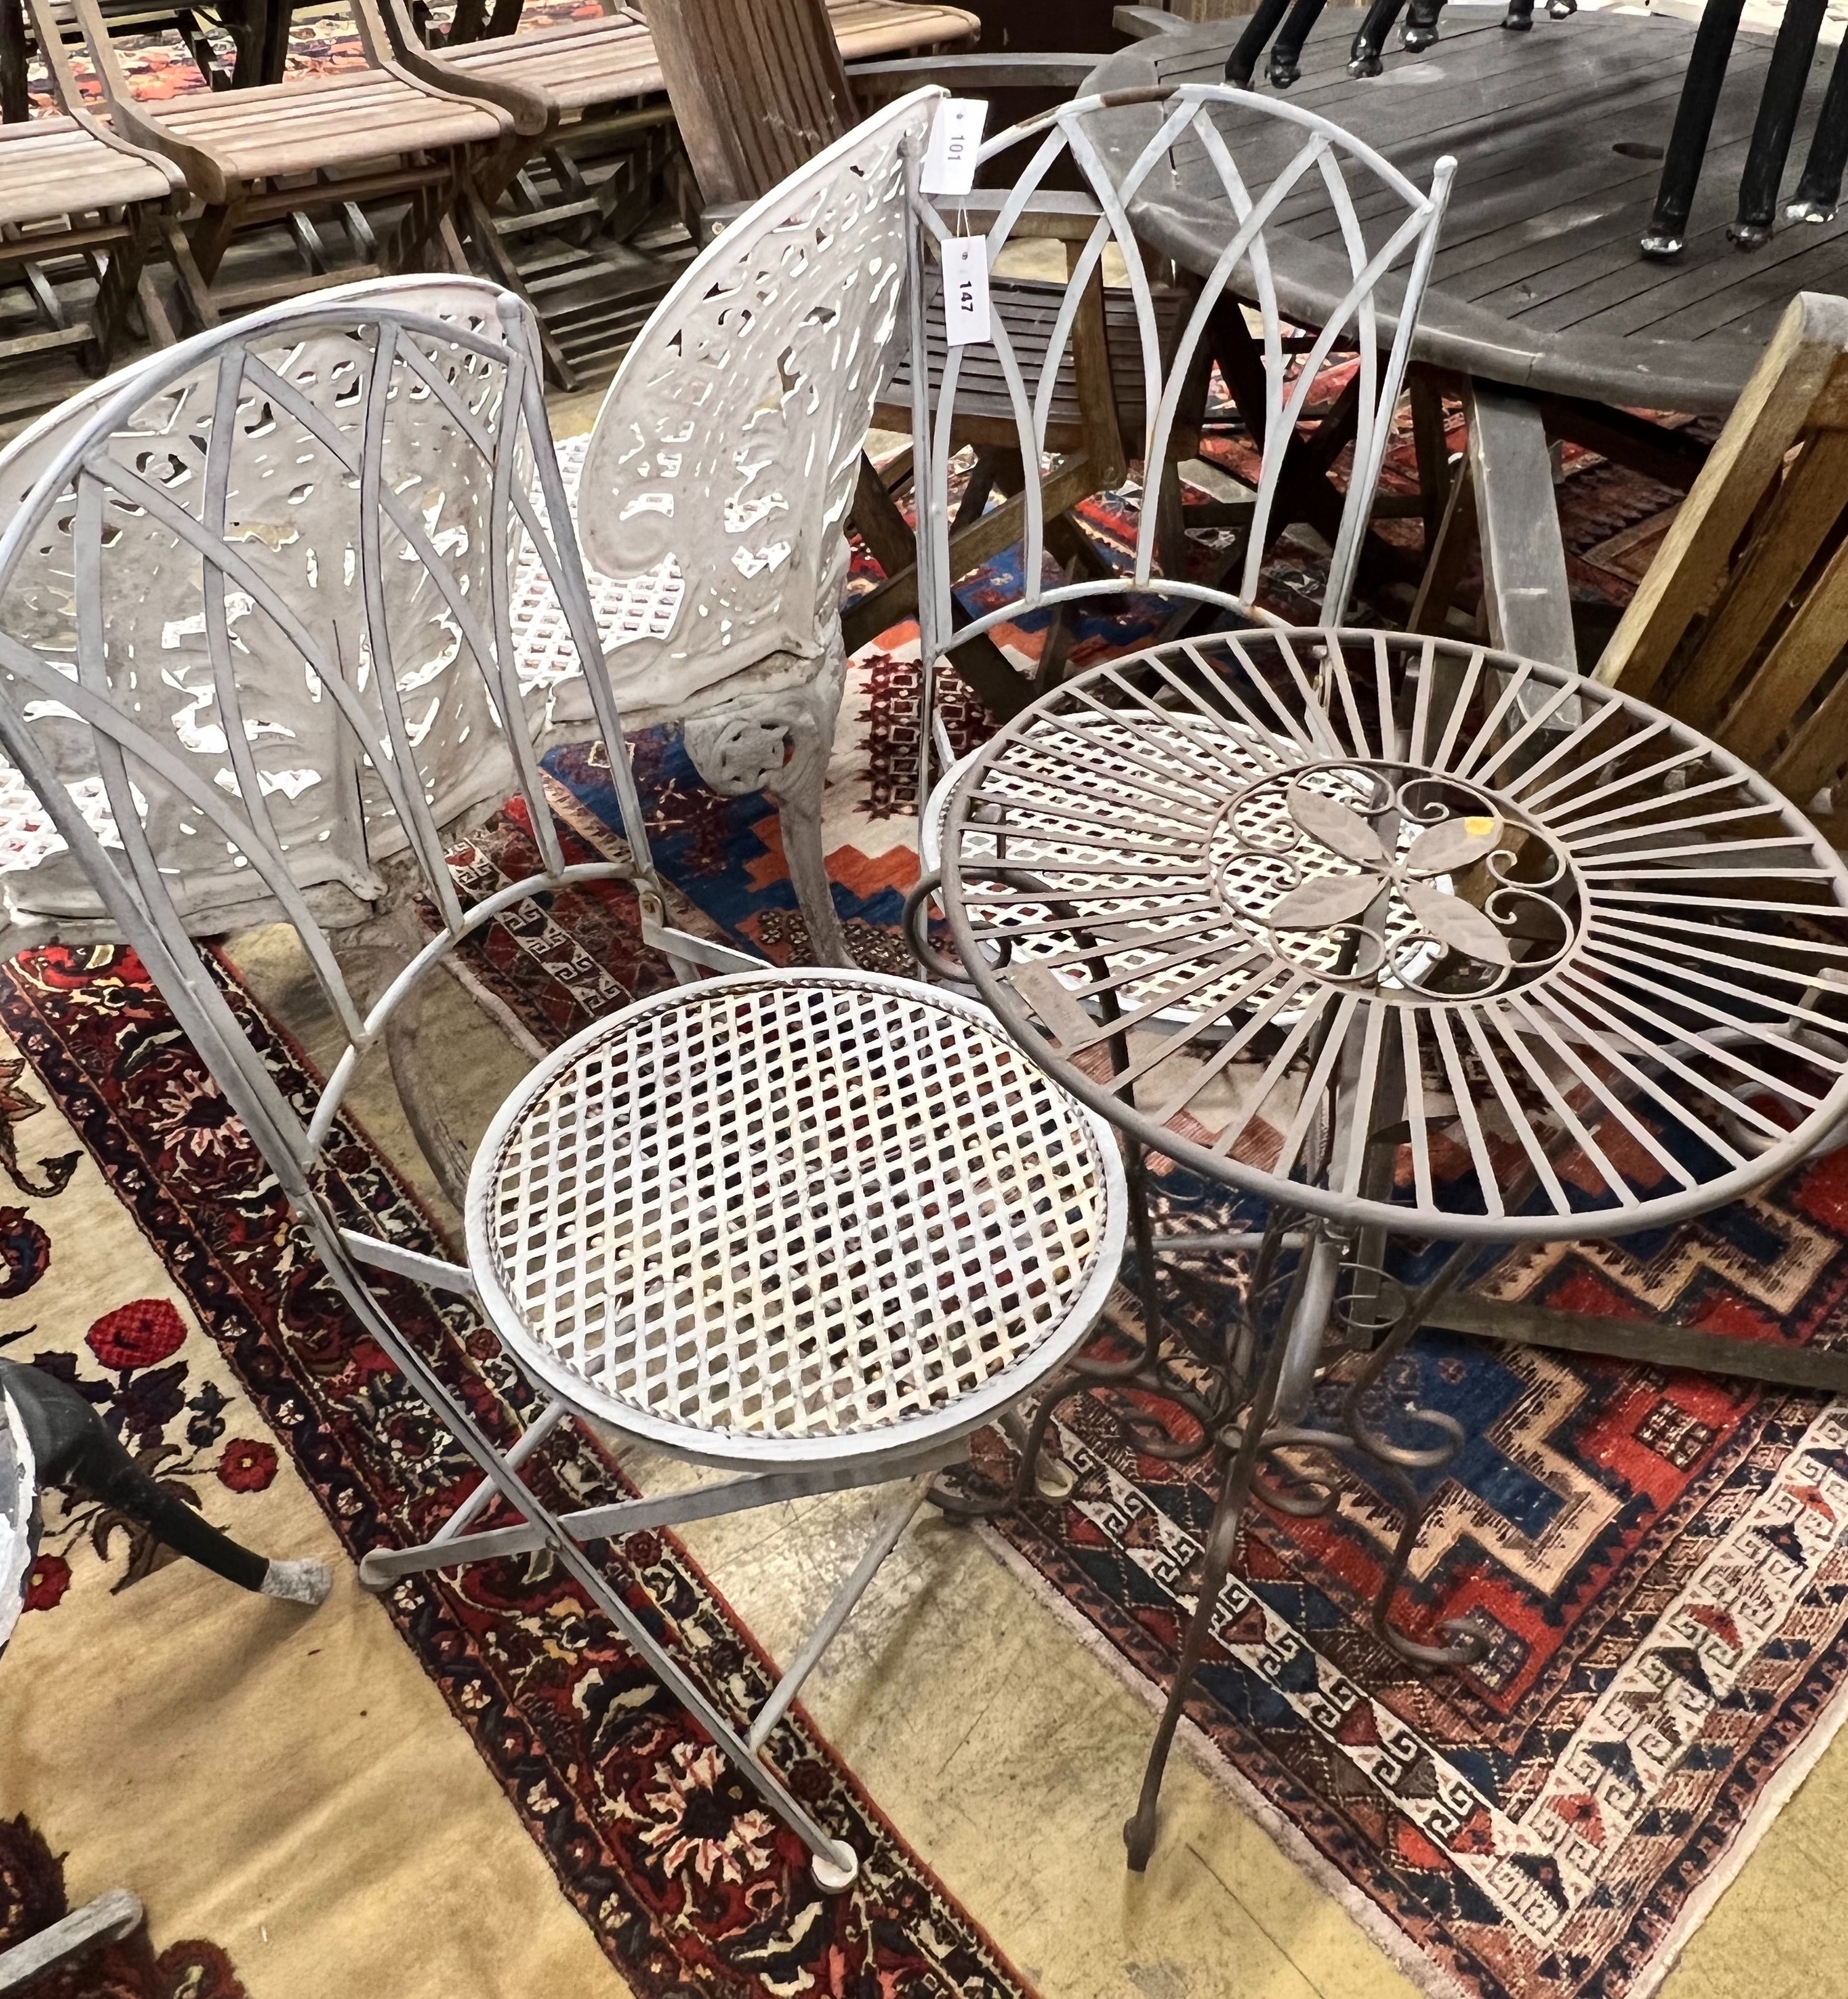 A Laura Ashley circular metal garden table, diameter 43cm, together with two folding garden chairs